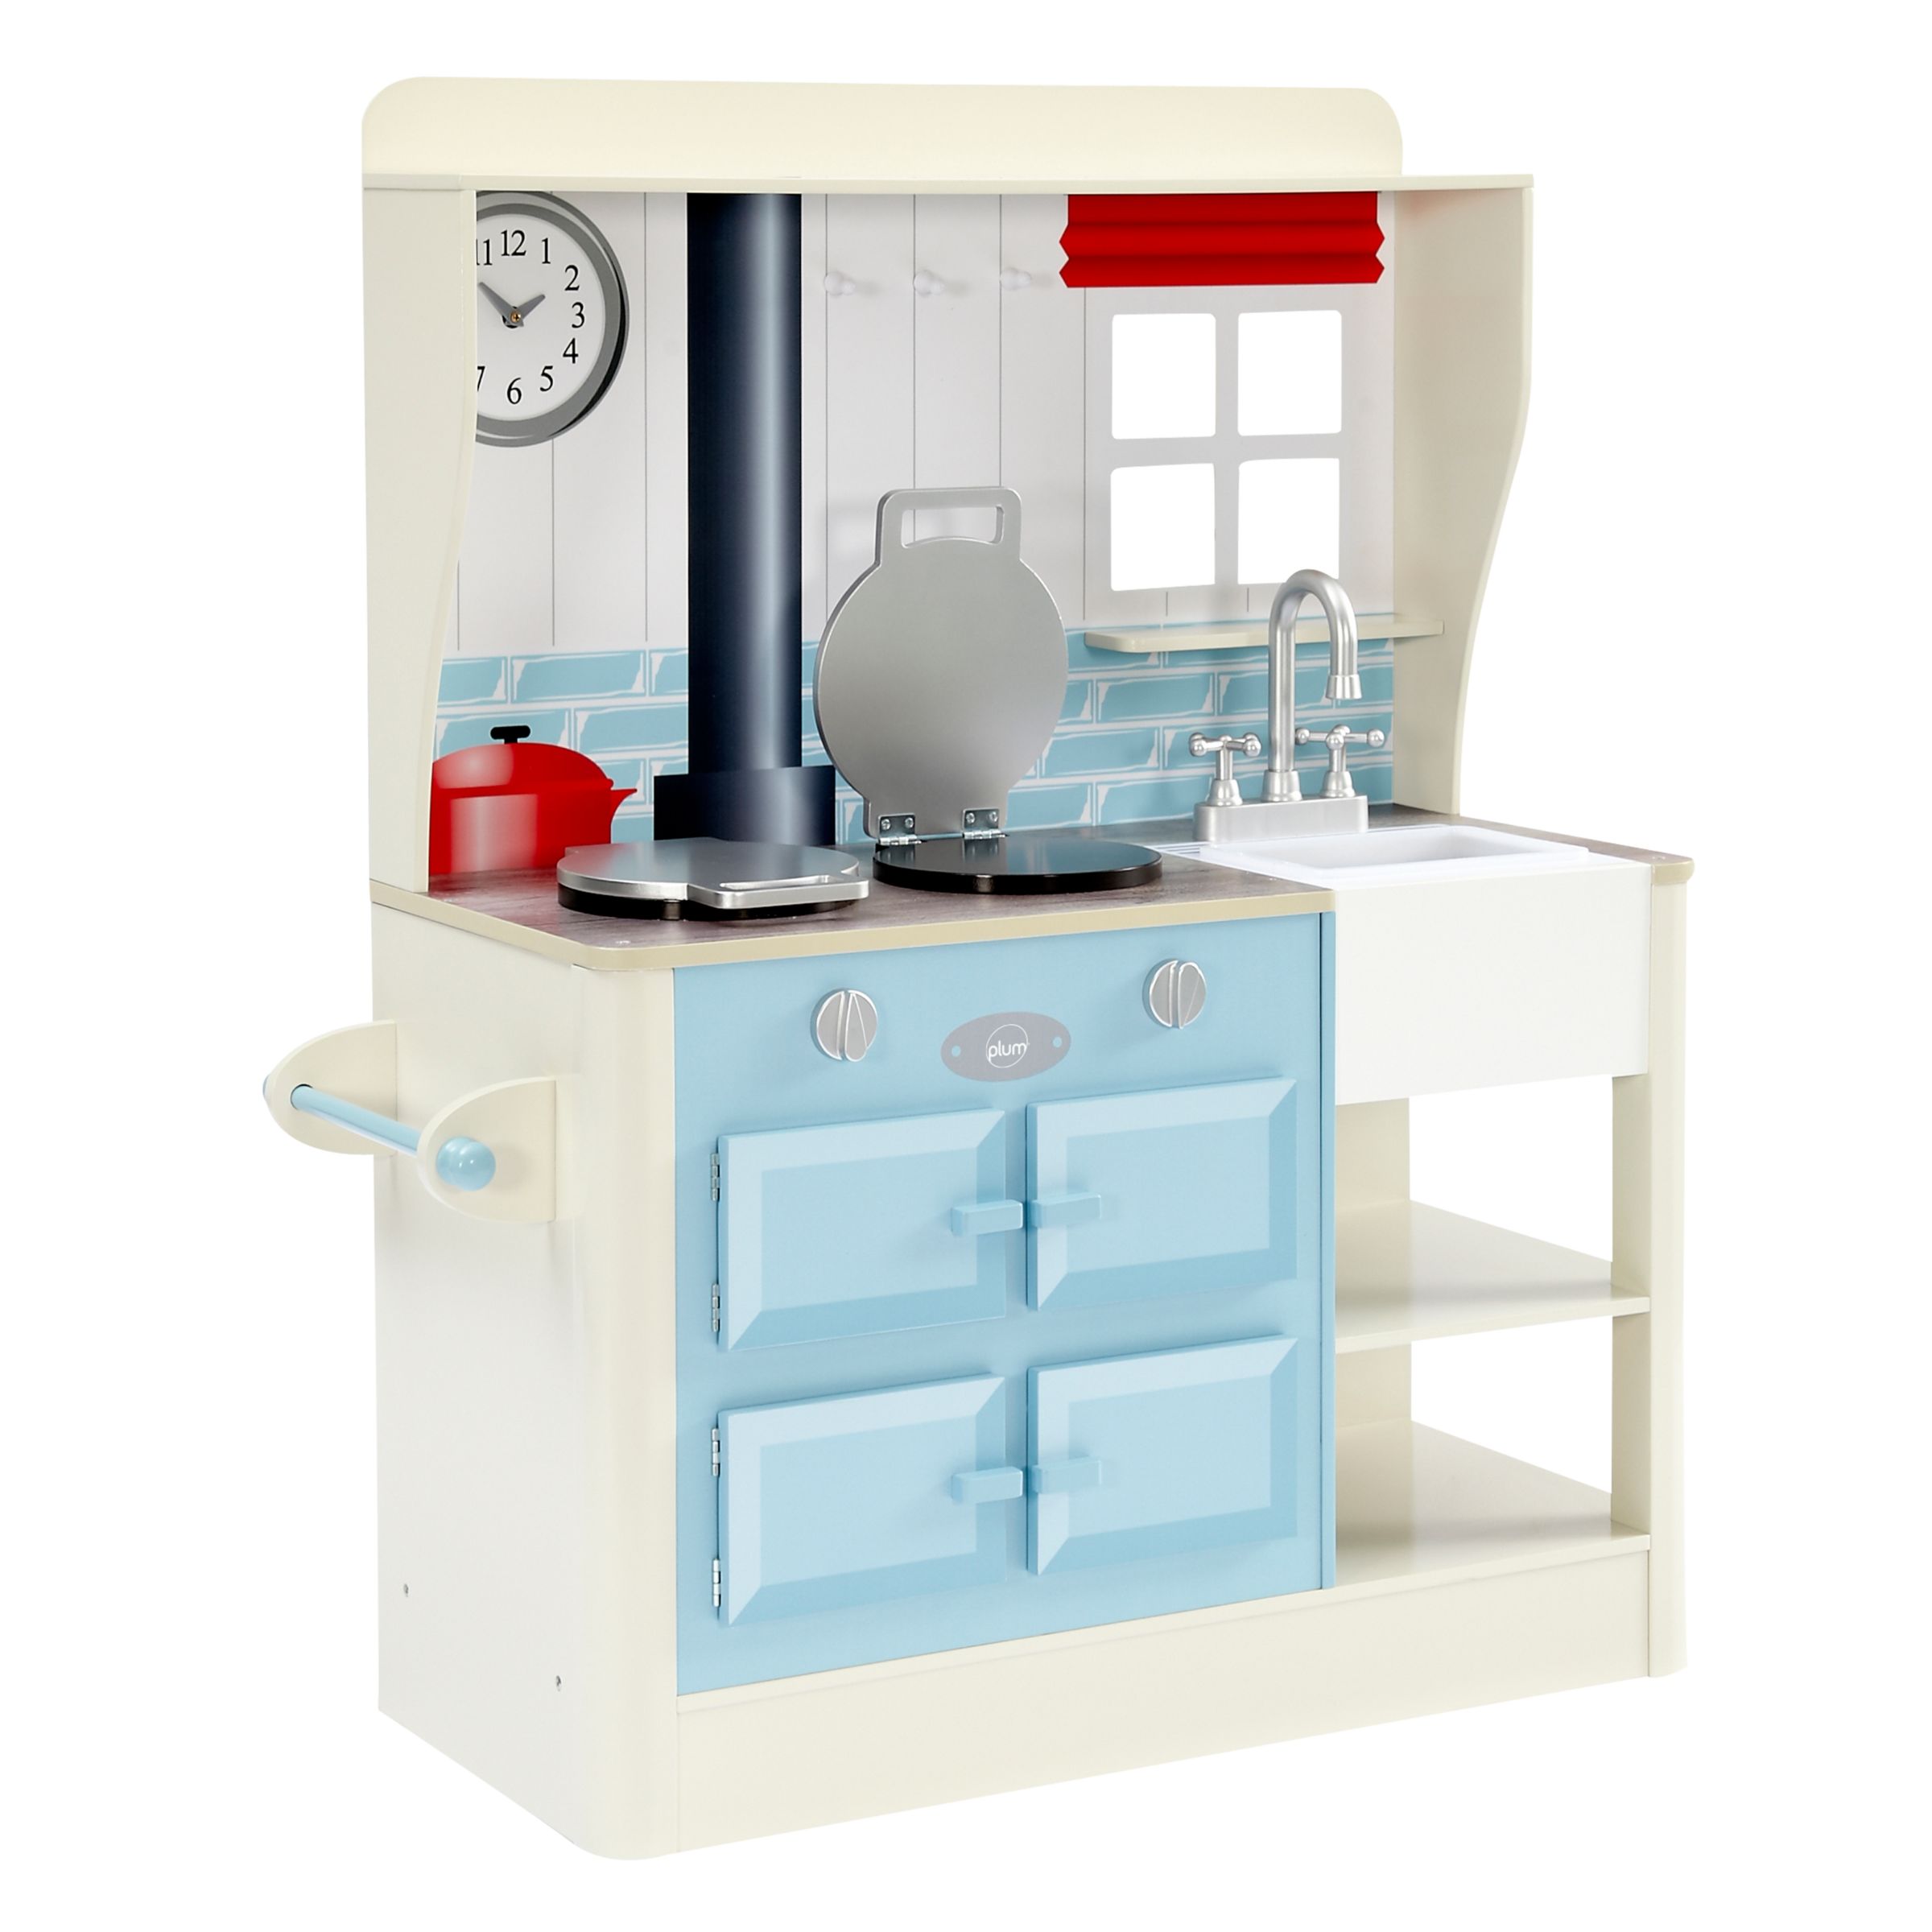 Plum Farmhouse Wooden Role Play Kitchen At John Lewis Partners